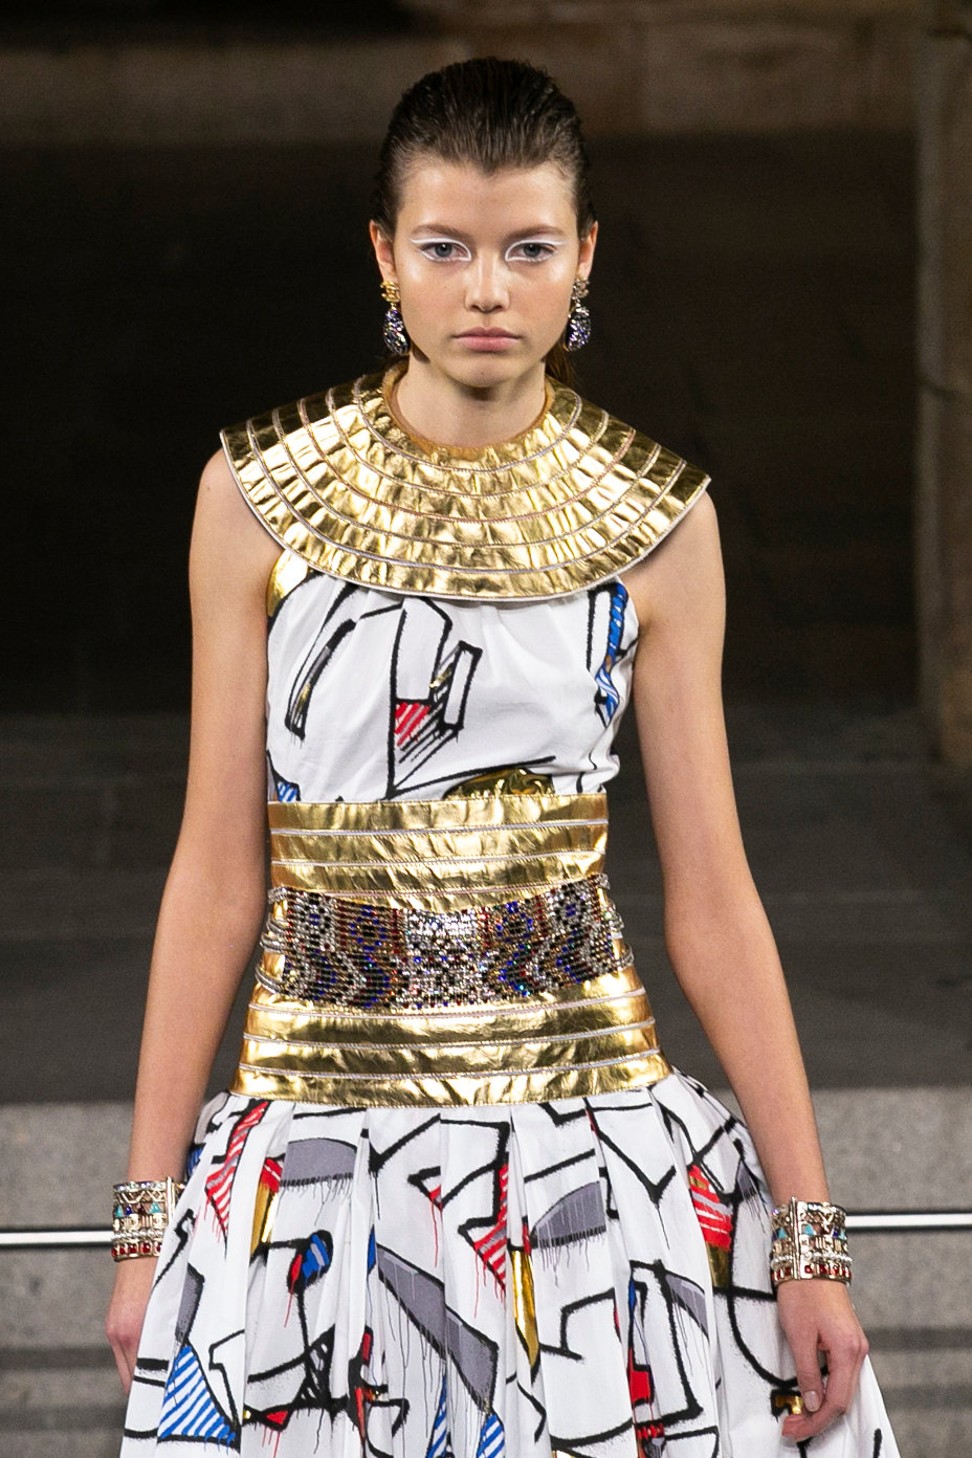 Only Karl can do this': Lagerfeld blends Egypt and Manhattan for Chanel 